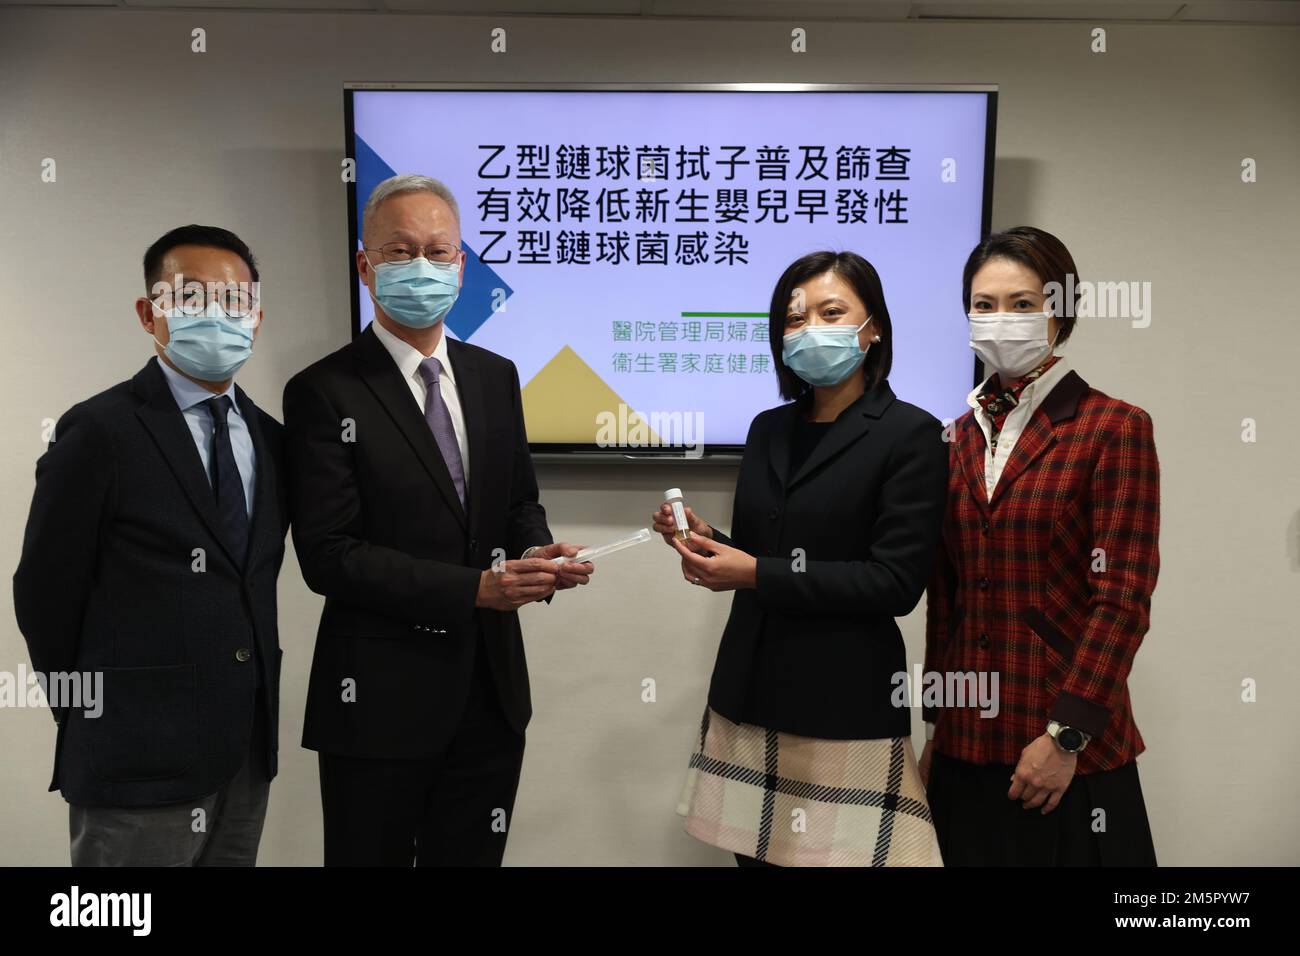 (L-R) Leung Wing-cheong, Consultant, Department of Obstetrics and Gynecology, Kwong Wah Hospital; Au Yeung Kam-chuen, Chairman, the HA Coordinating Committee in Obstetrics and Gynaecology; Viola Chan Ying-tze, Associated Consultant, Department of Obstetrics and Gynecology, Kwong Wah Hospital and Vinci Ma, Senior Medical and Health Officer (Family Health Service), Department of Health pose for a picture during an press conference on swab test for preventing Neonatal Group B Streptococcus infection at the headquarter of Hospital Authority (HA). 22DEC22  SCMP/Yik Yeung-man Stock Photo